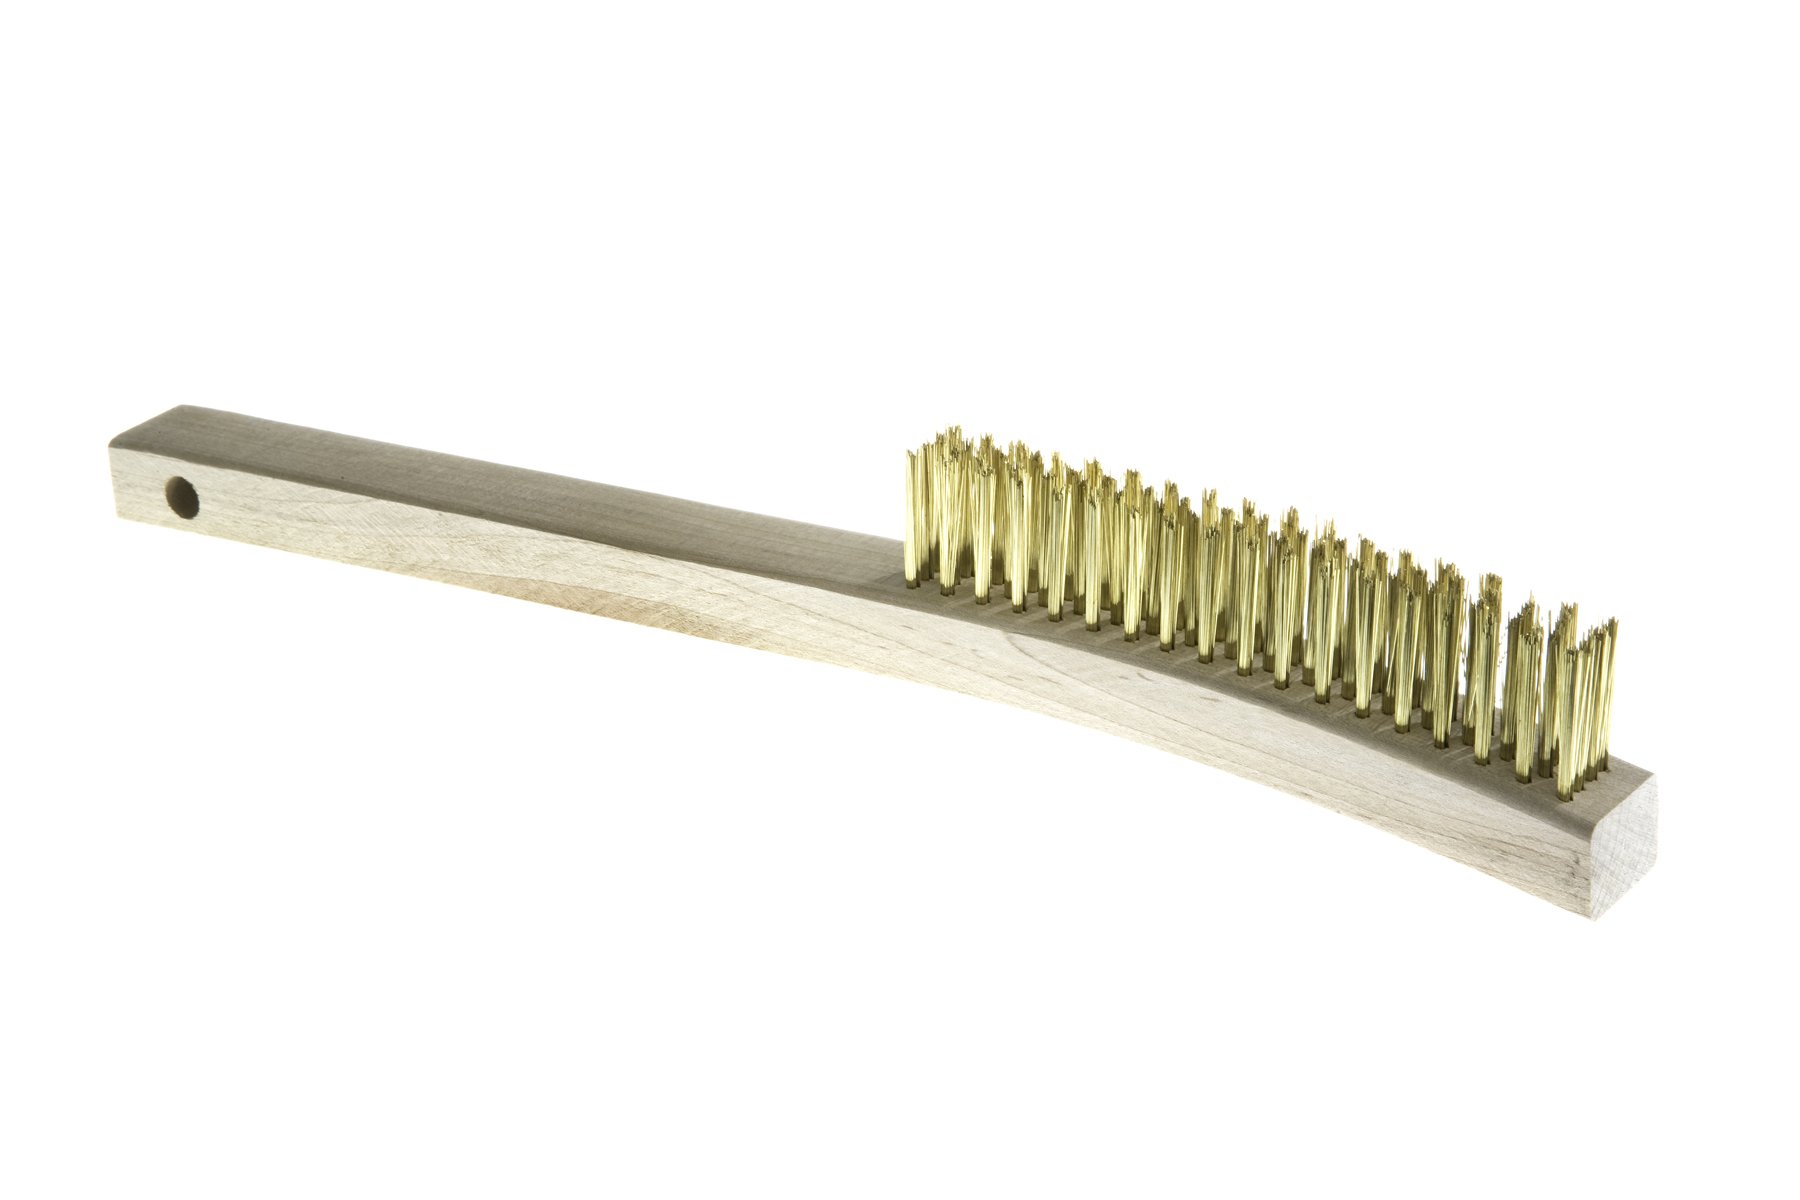 Brass Wire Brush – 4 Row – Long Curved Handle Wood Block – Atlas